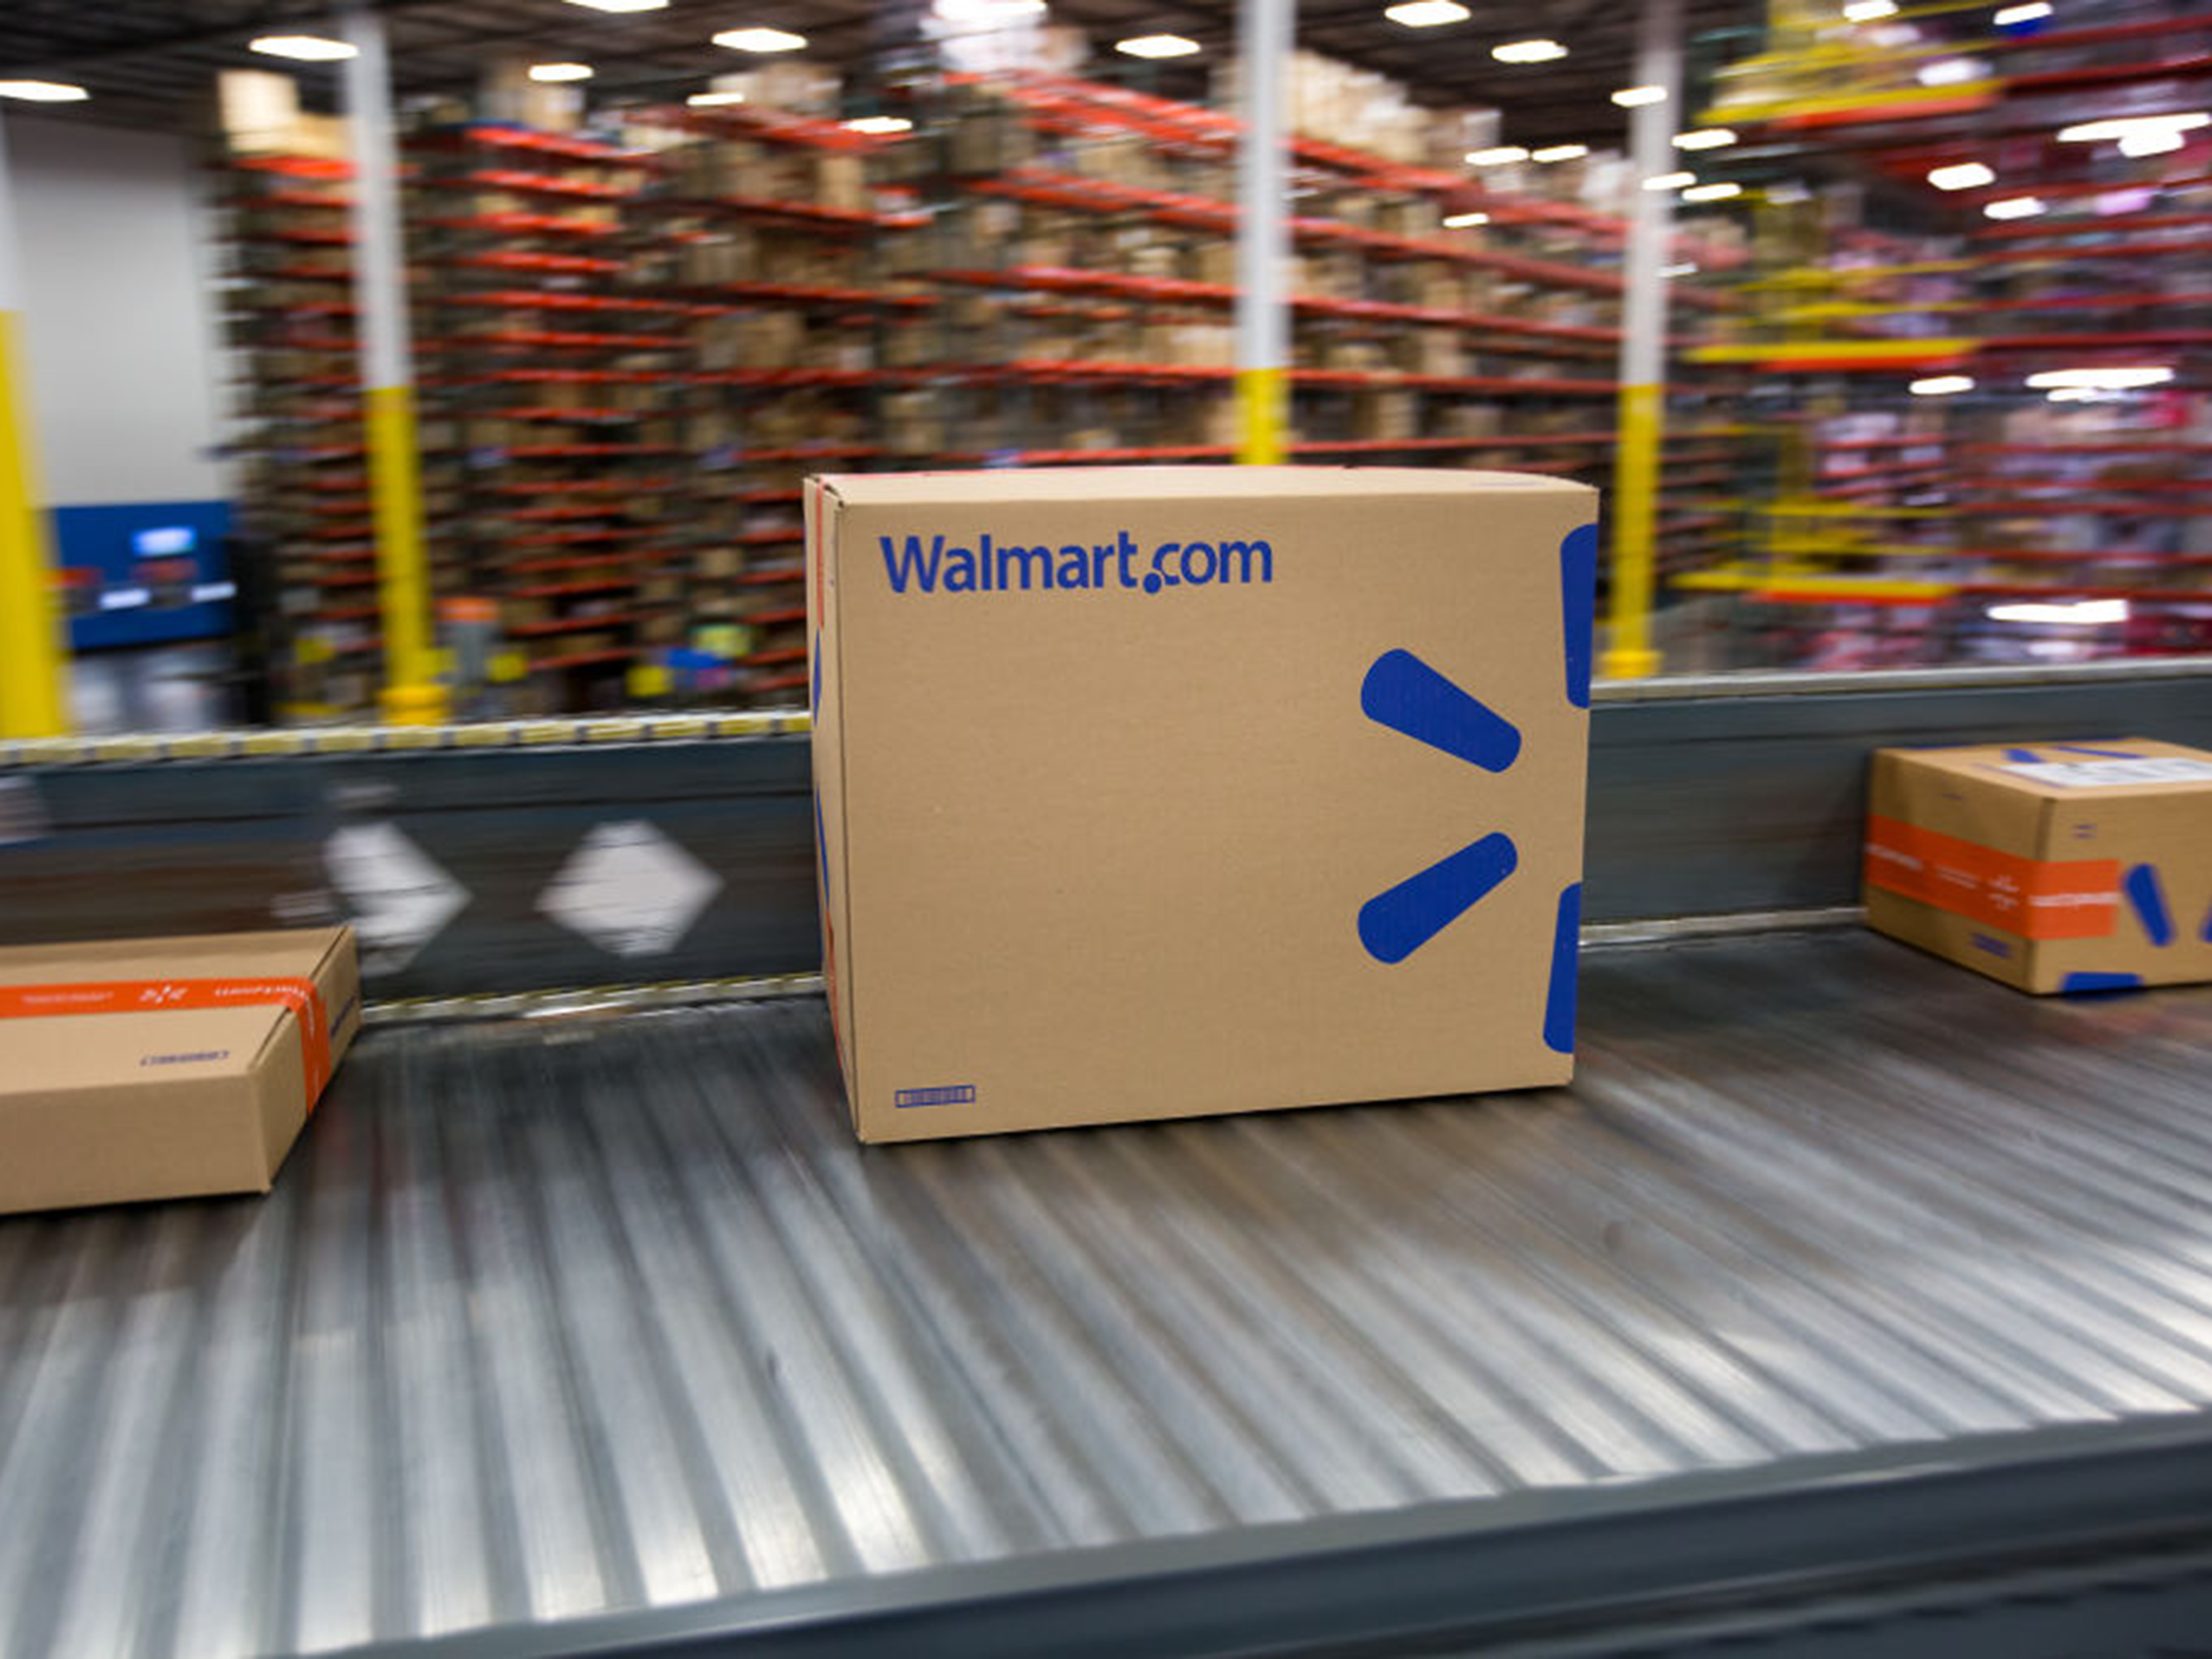 Walmart Warehouse Robots Are Latest Tool in Battle With Amazon